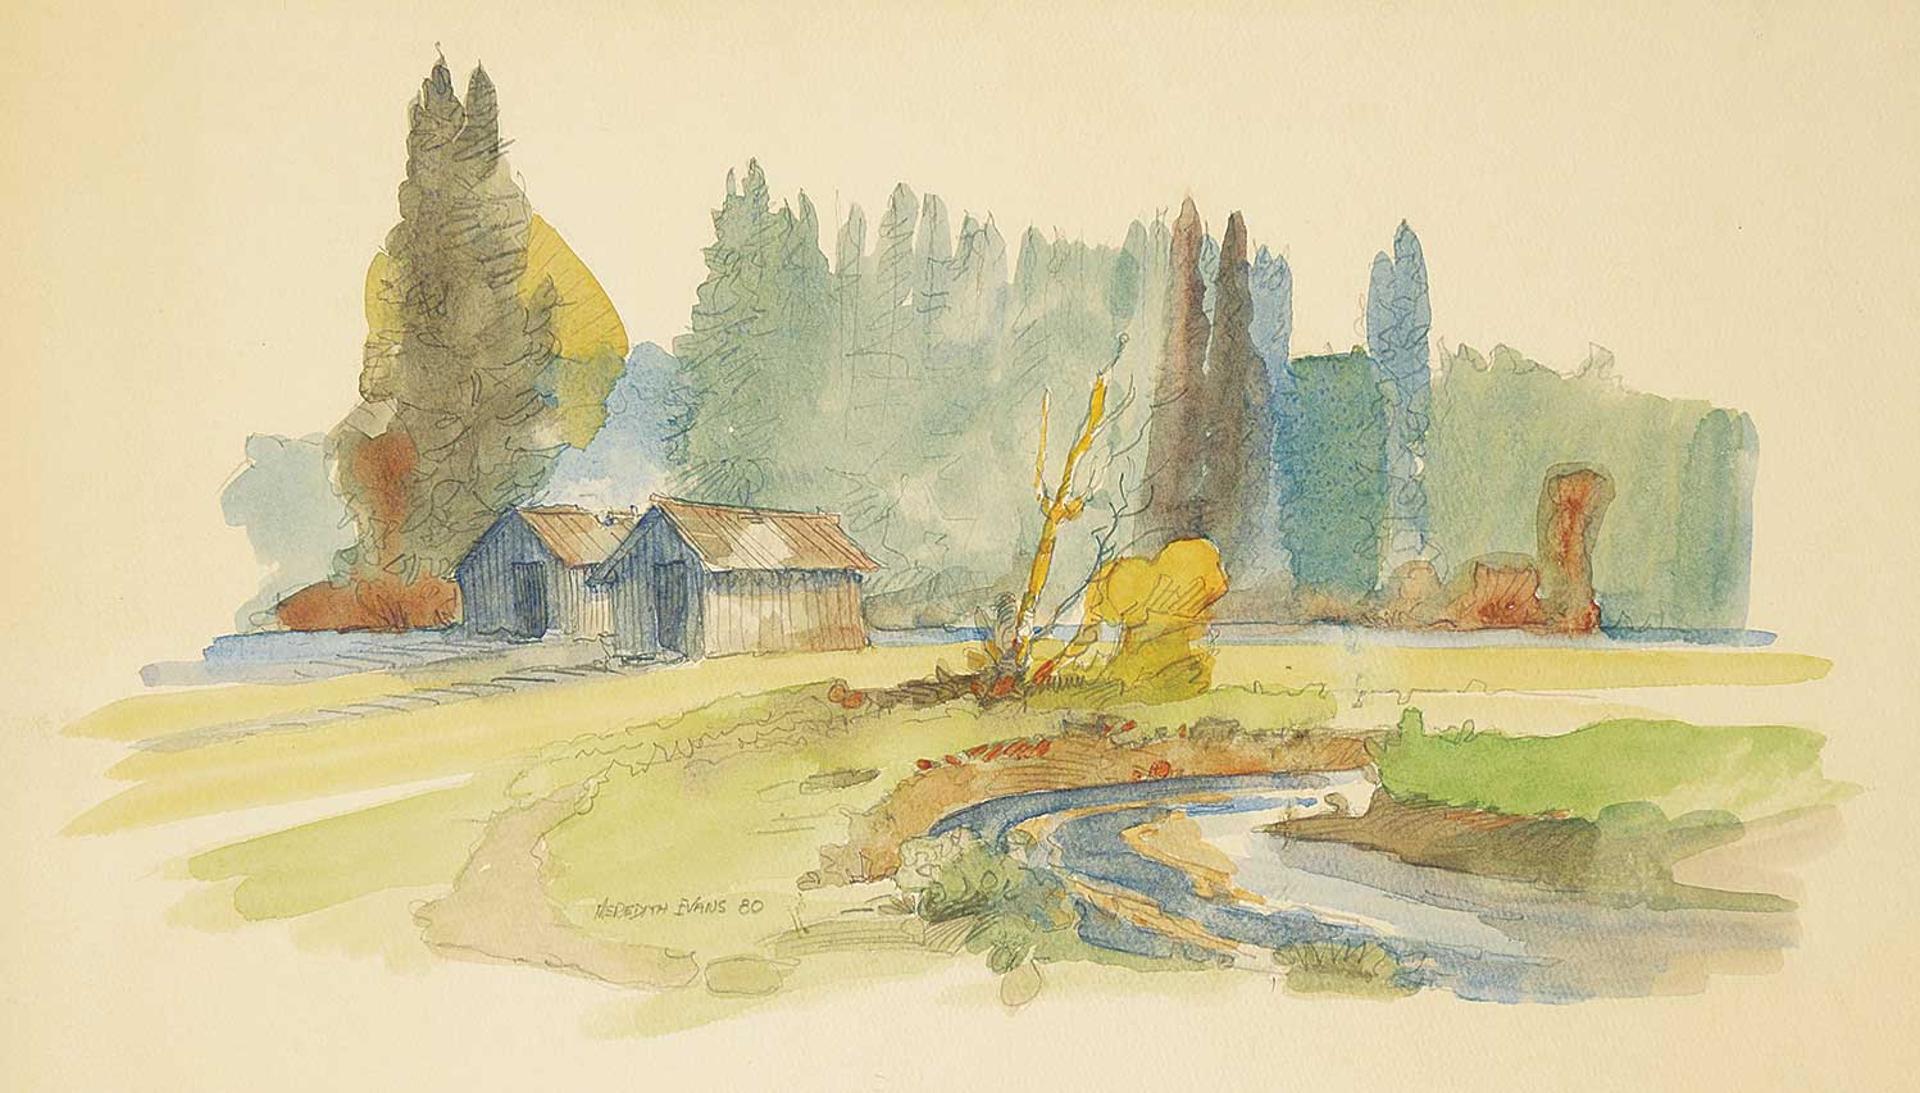 Meredith Evans (1919-1996) - Untitled - Country View